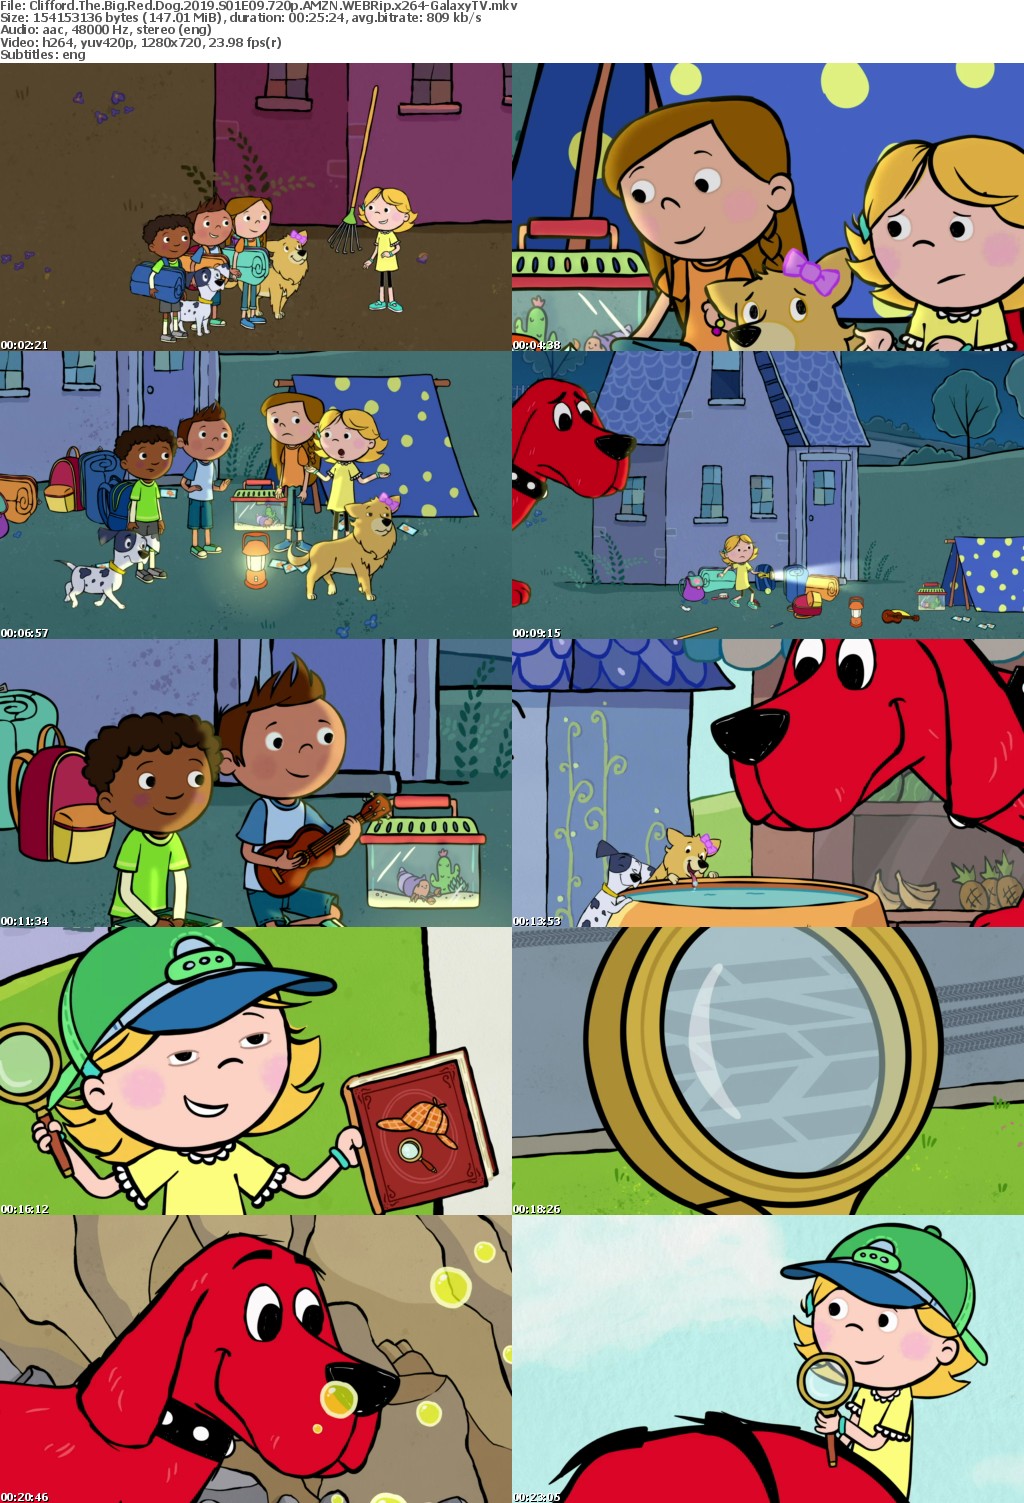 Clifford The Big Red Dog 2019 S01 COMPLETE 720p AMZN WEBRip x264-GalaxyTV